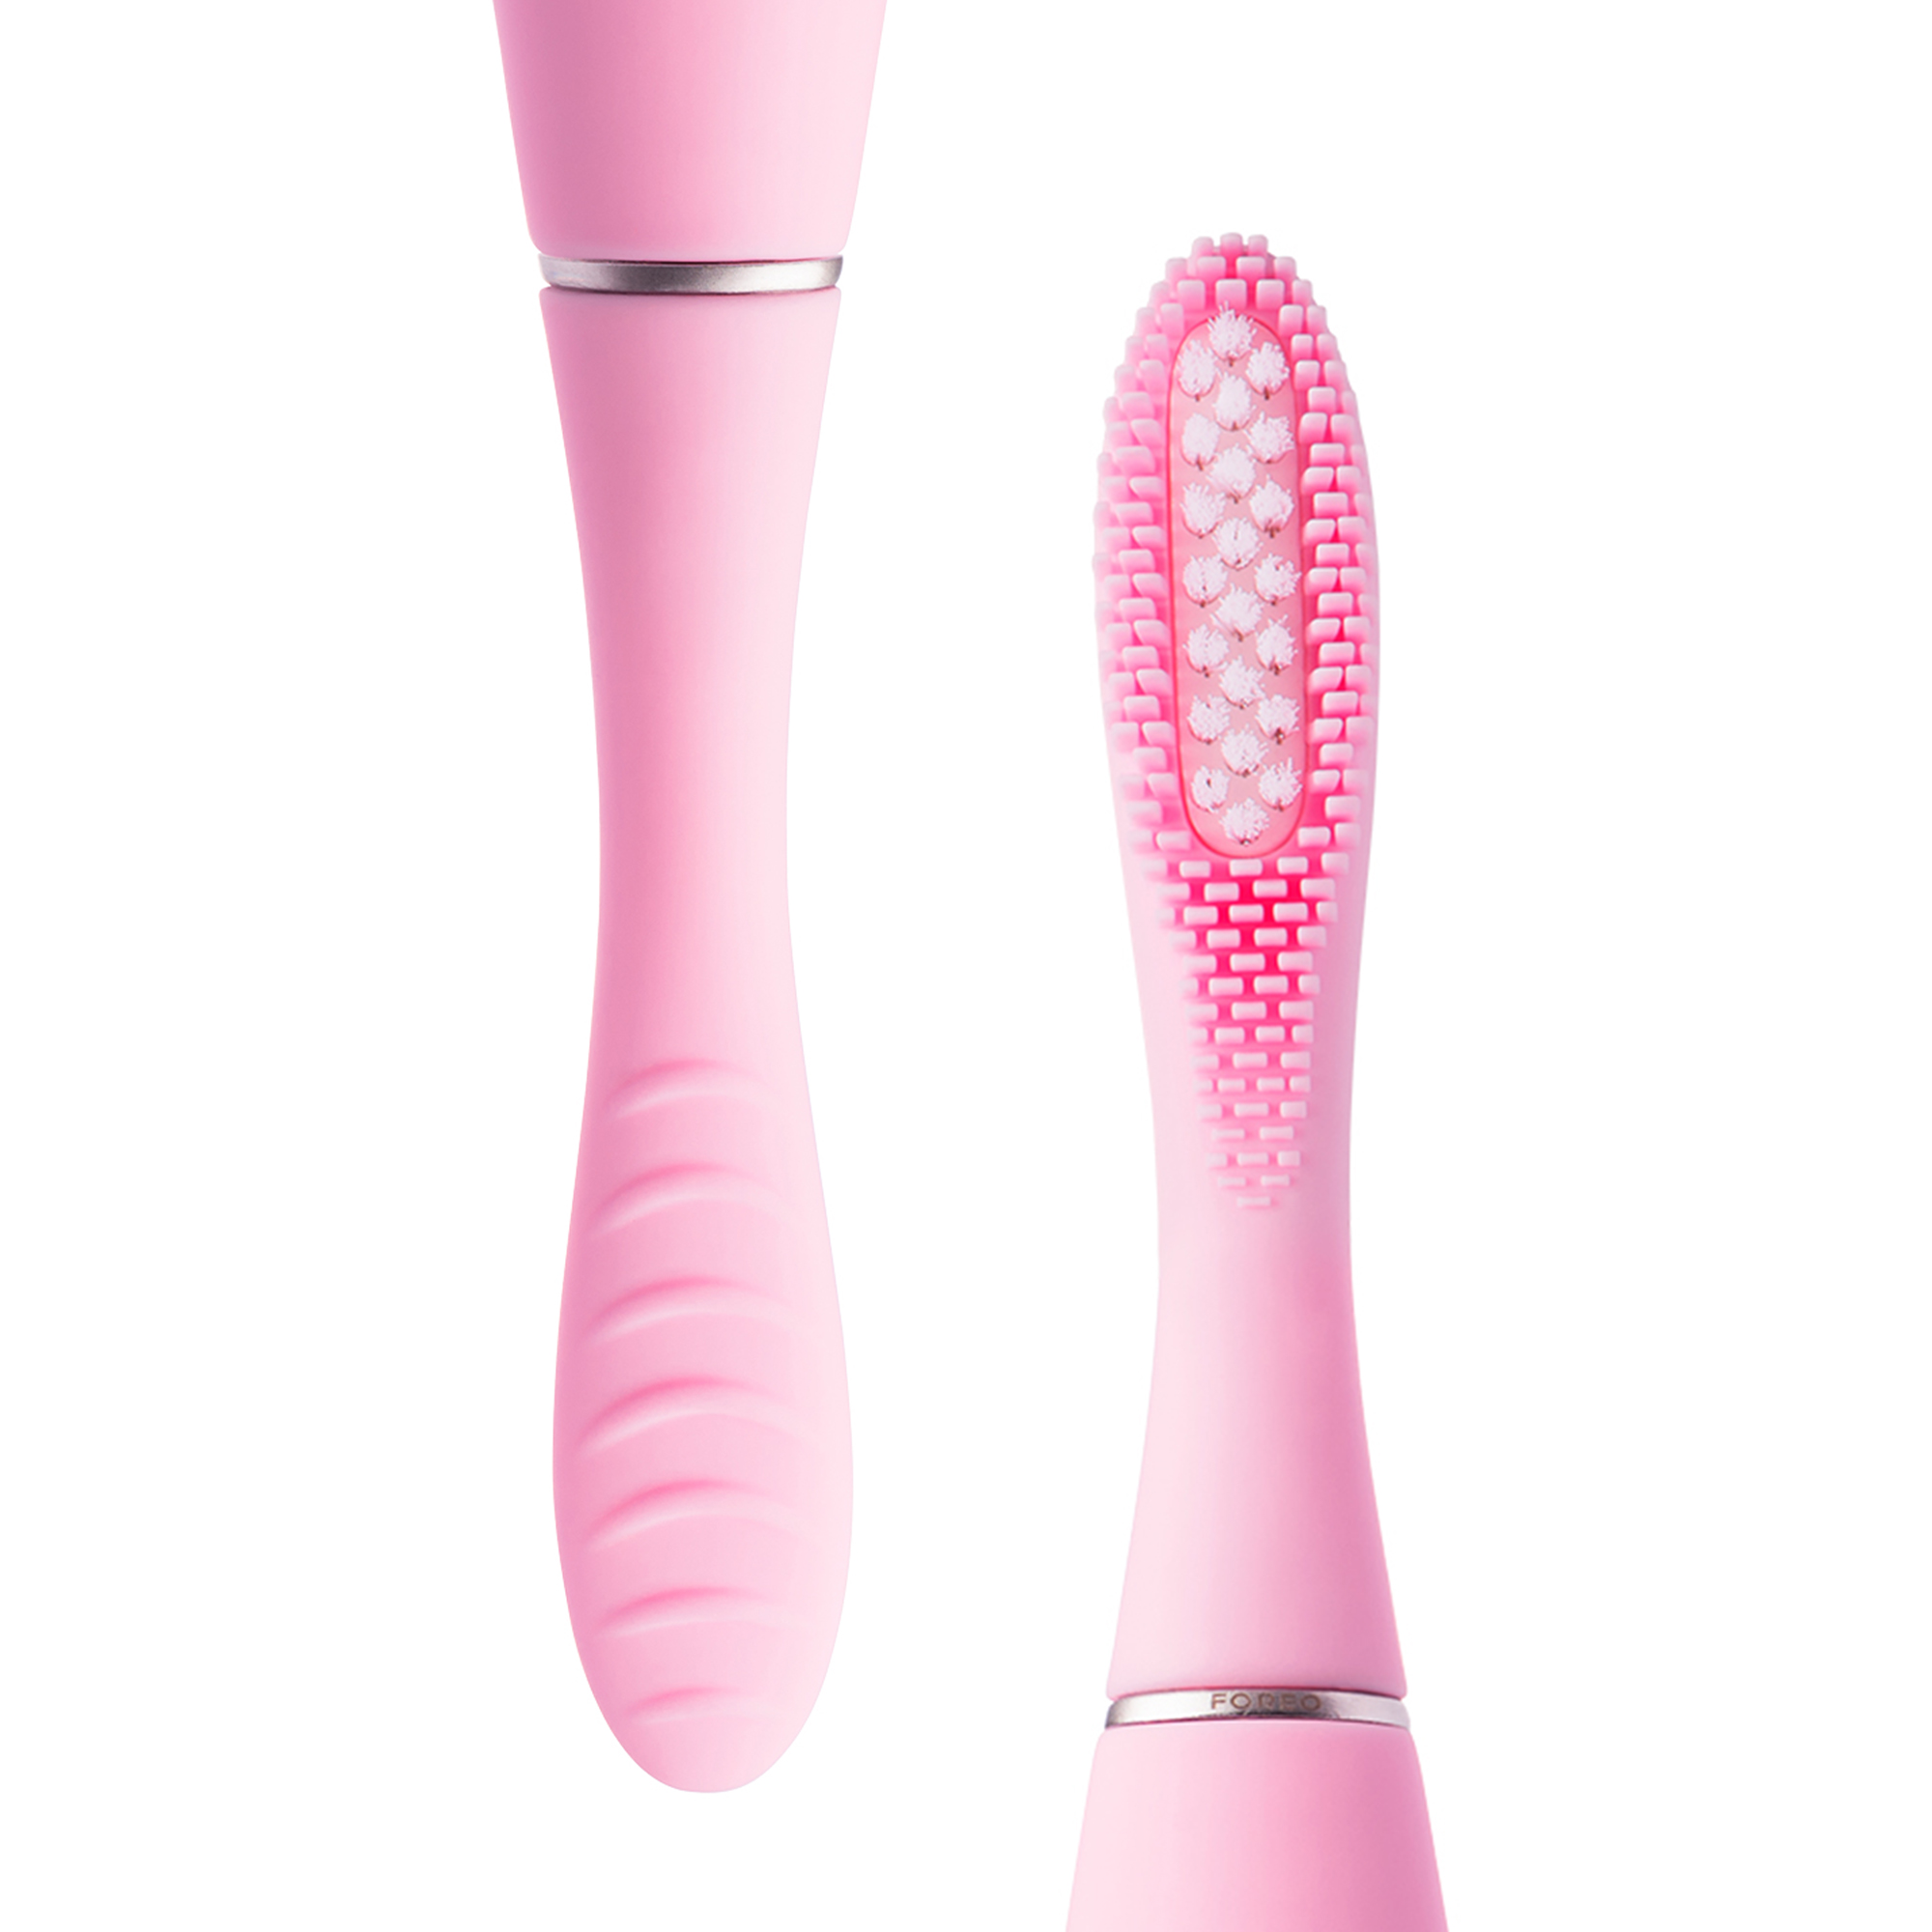 Picture of Foreo Issa 2 Pearl Pink